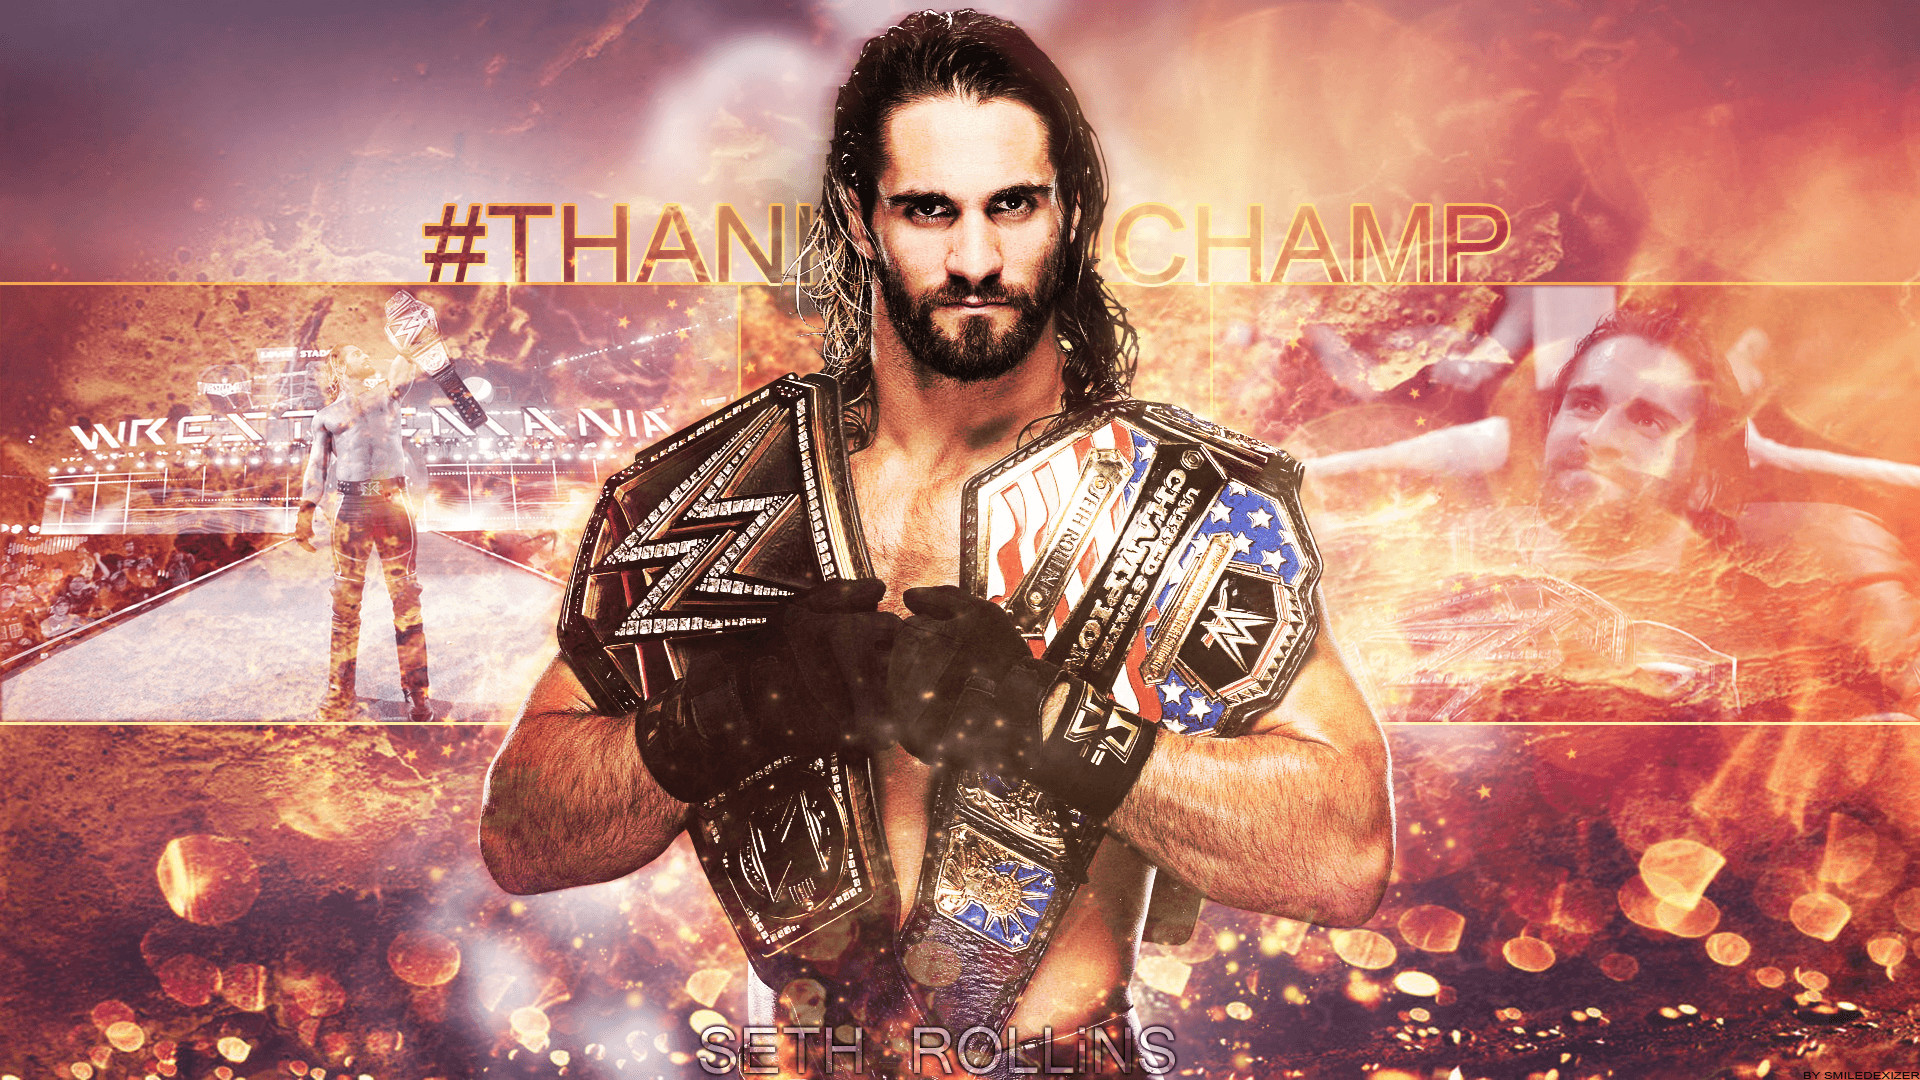 1920x1080 Seth Rollins HD Wallpapers - HD Wallpapers Backgrounds of Your Choice